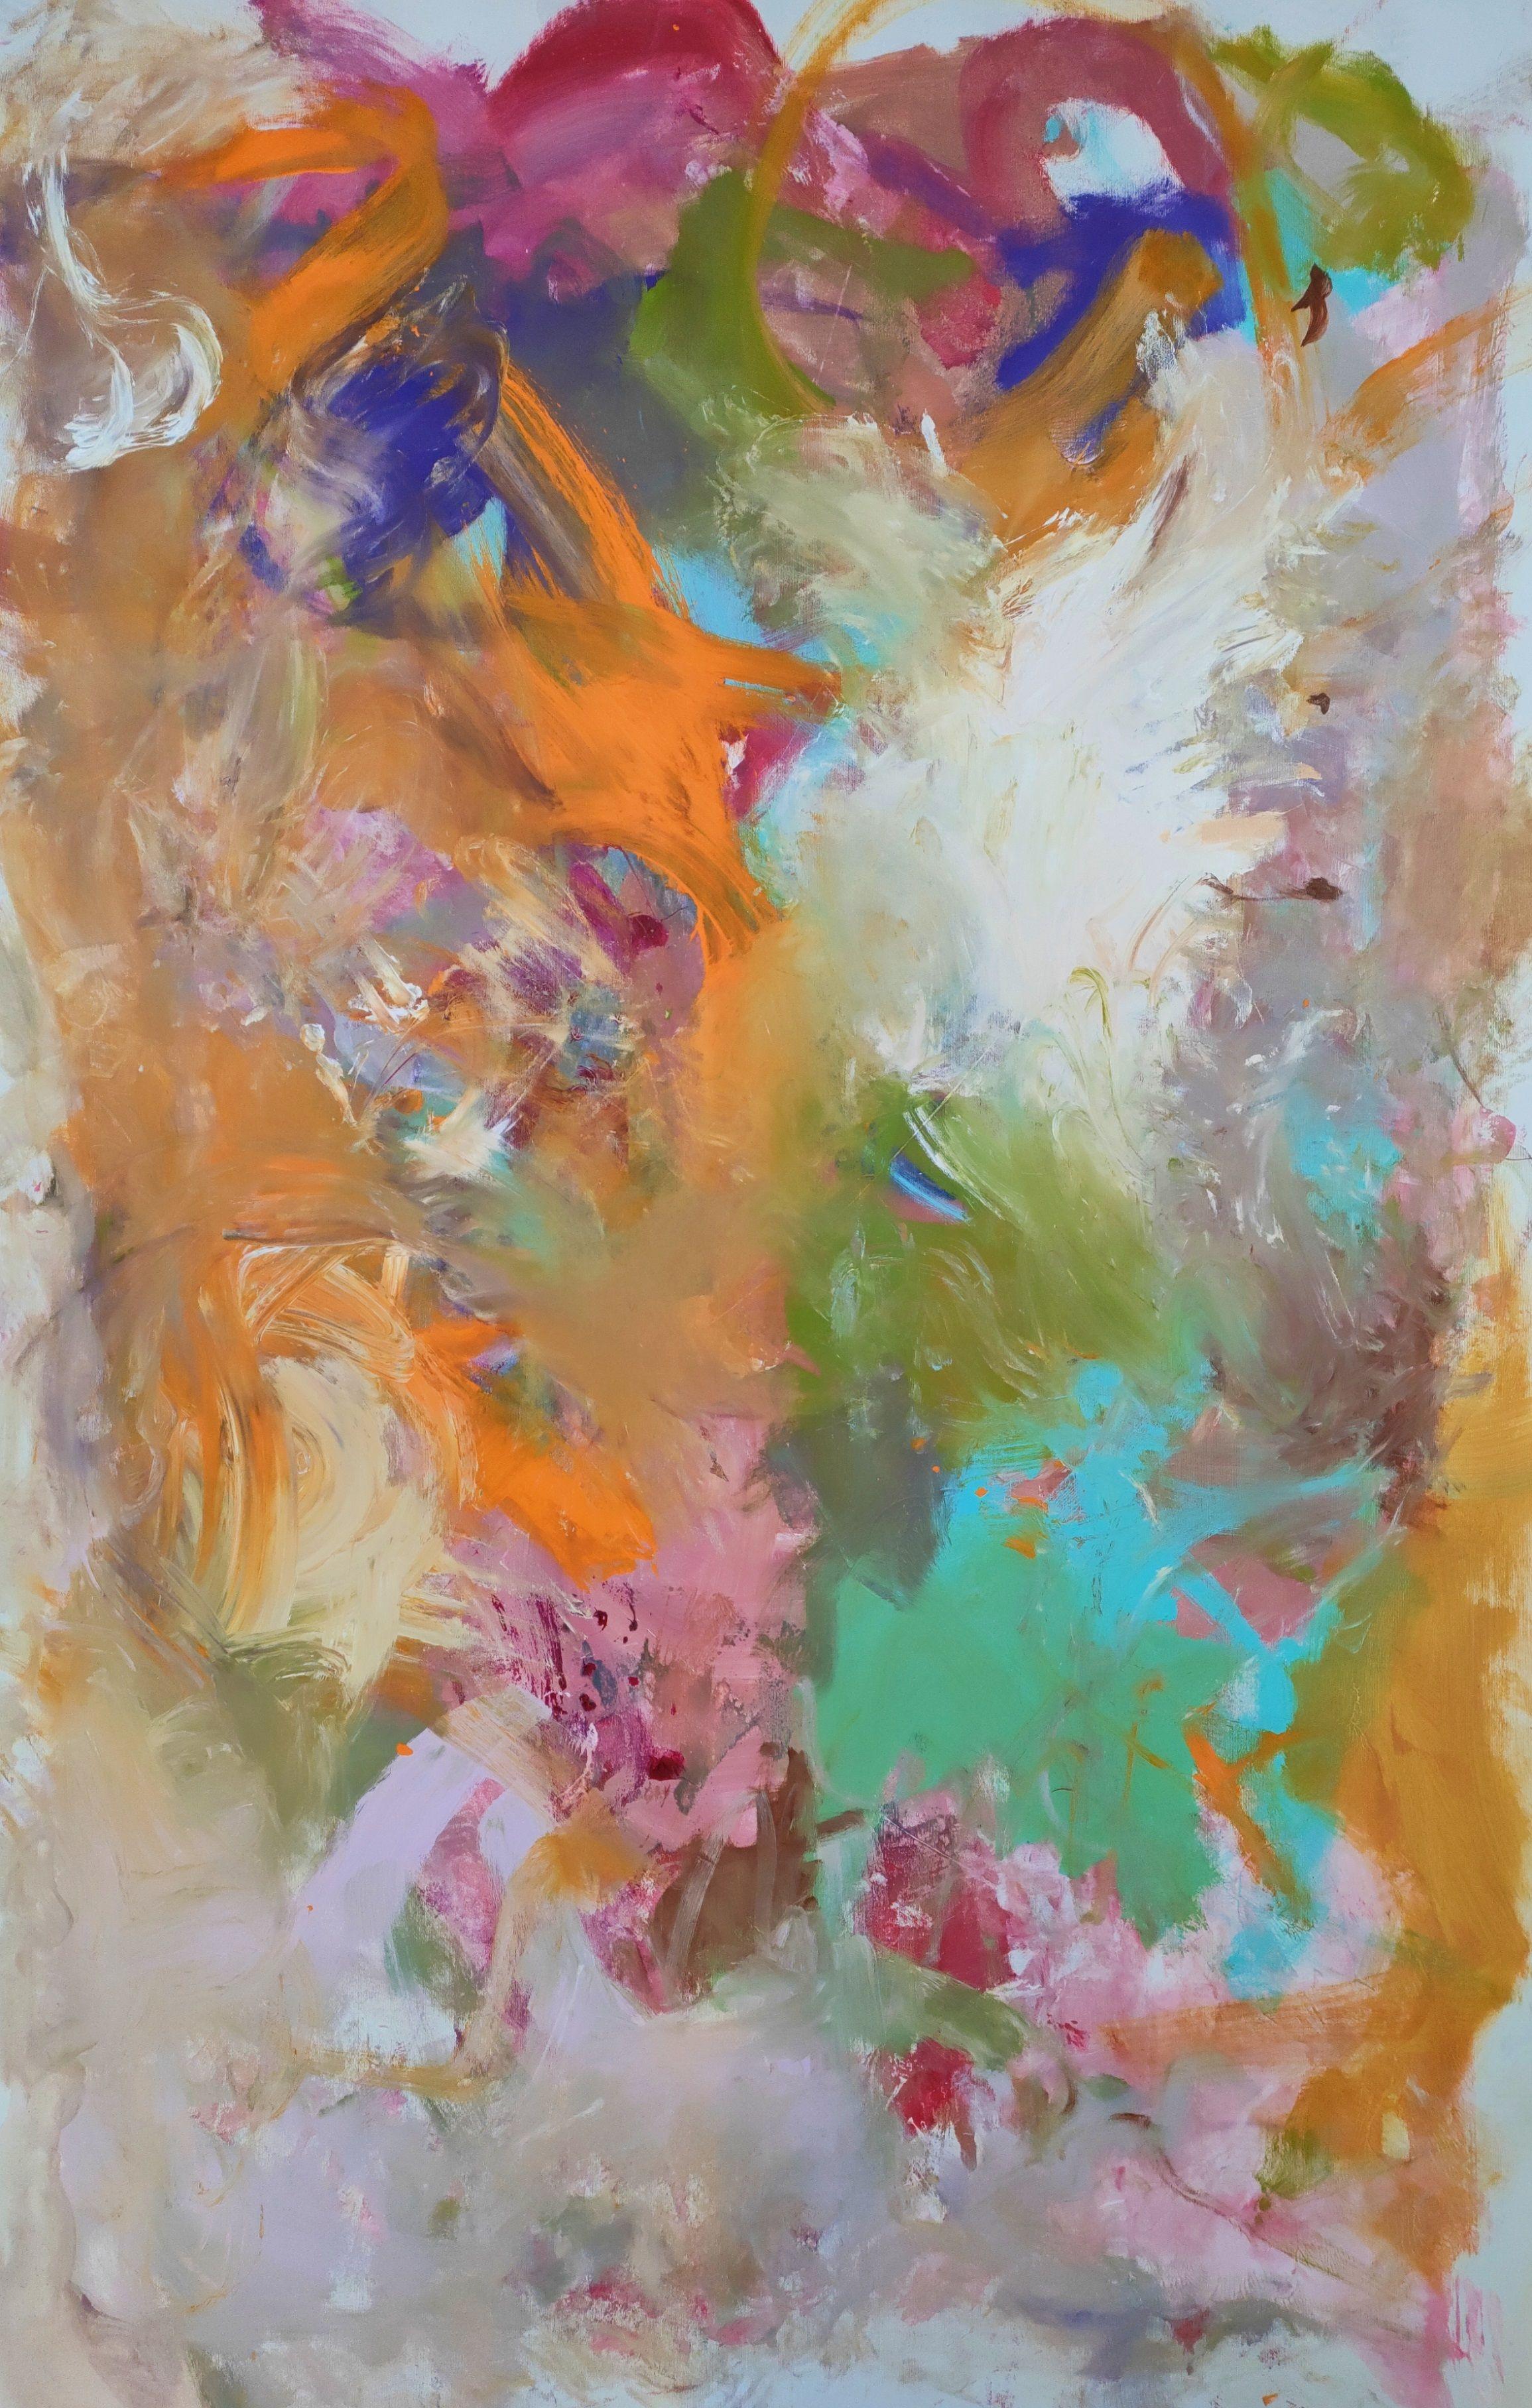 Large abstract painting worked in several layers with professional and high quality painting with anti UV protection and velvet rendering. The palette is colorful, warm and rich. :: Painting :: Abstract Expressionism :: This piece comes with an